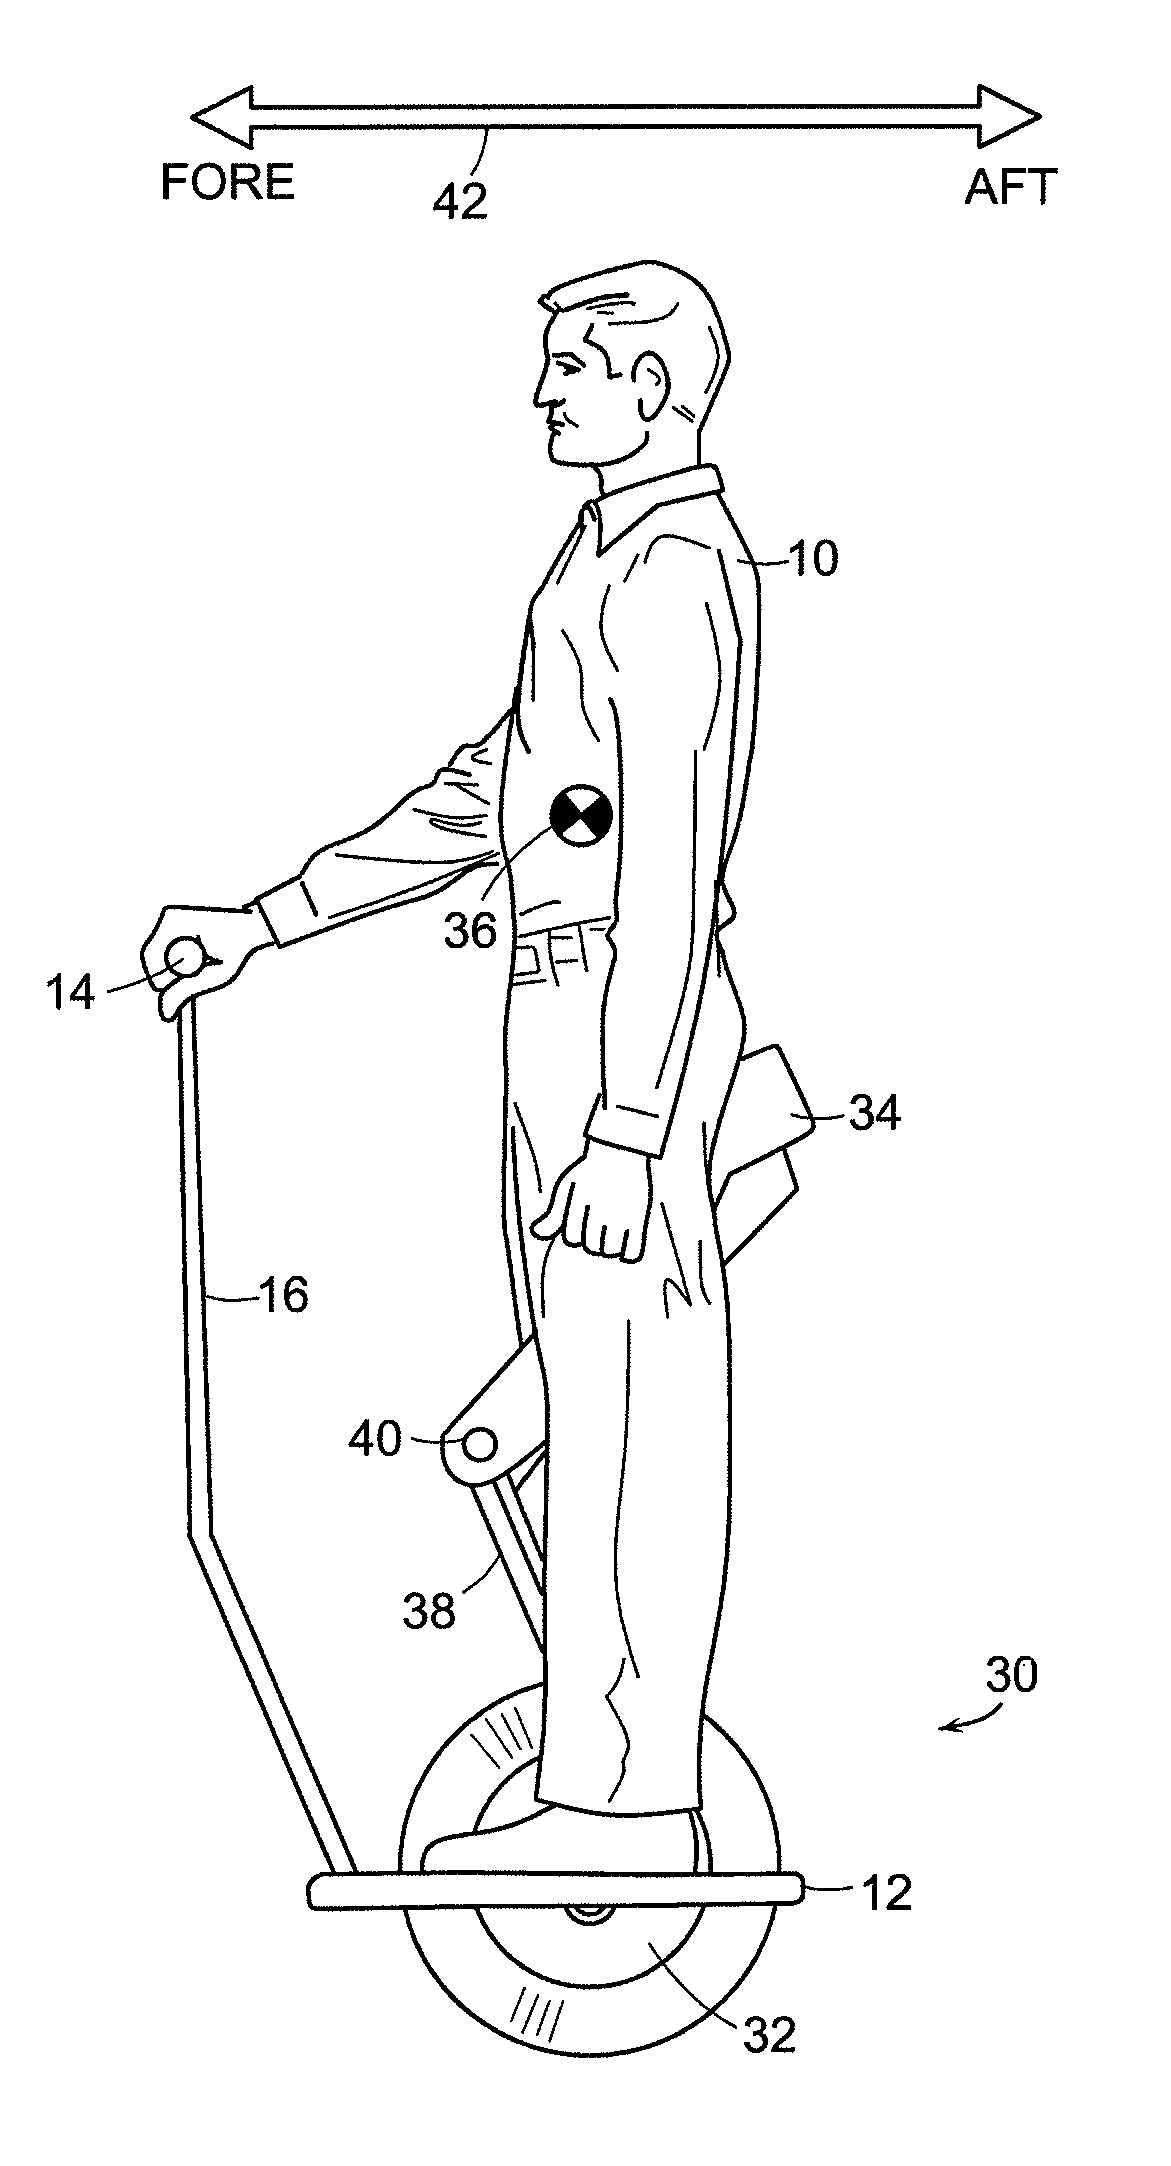 Apparatus and method for control of a vehicle